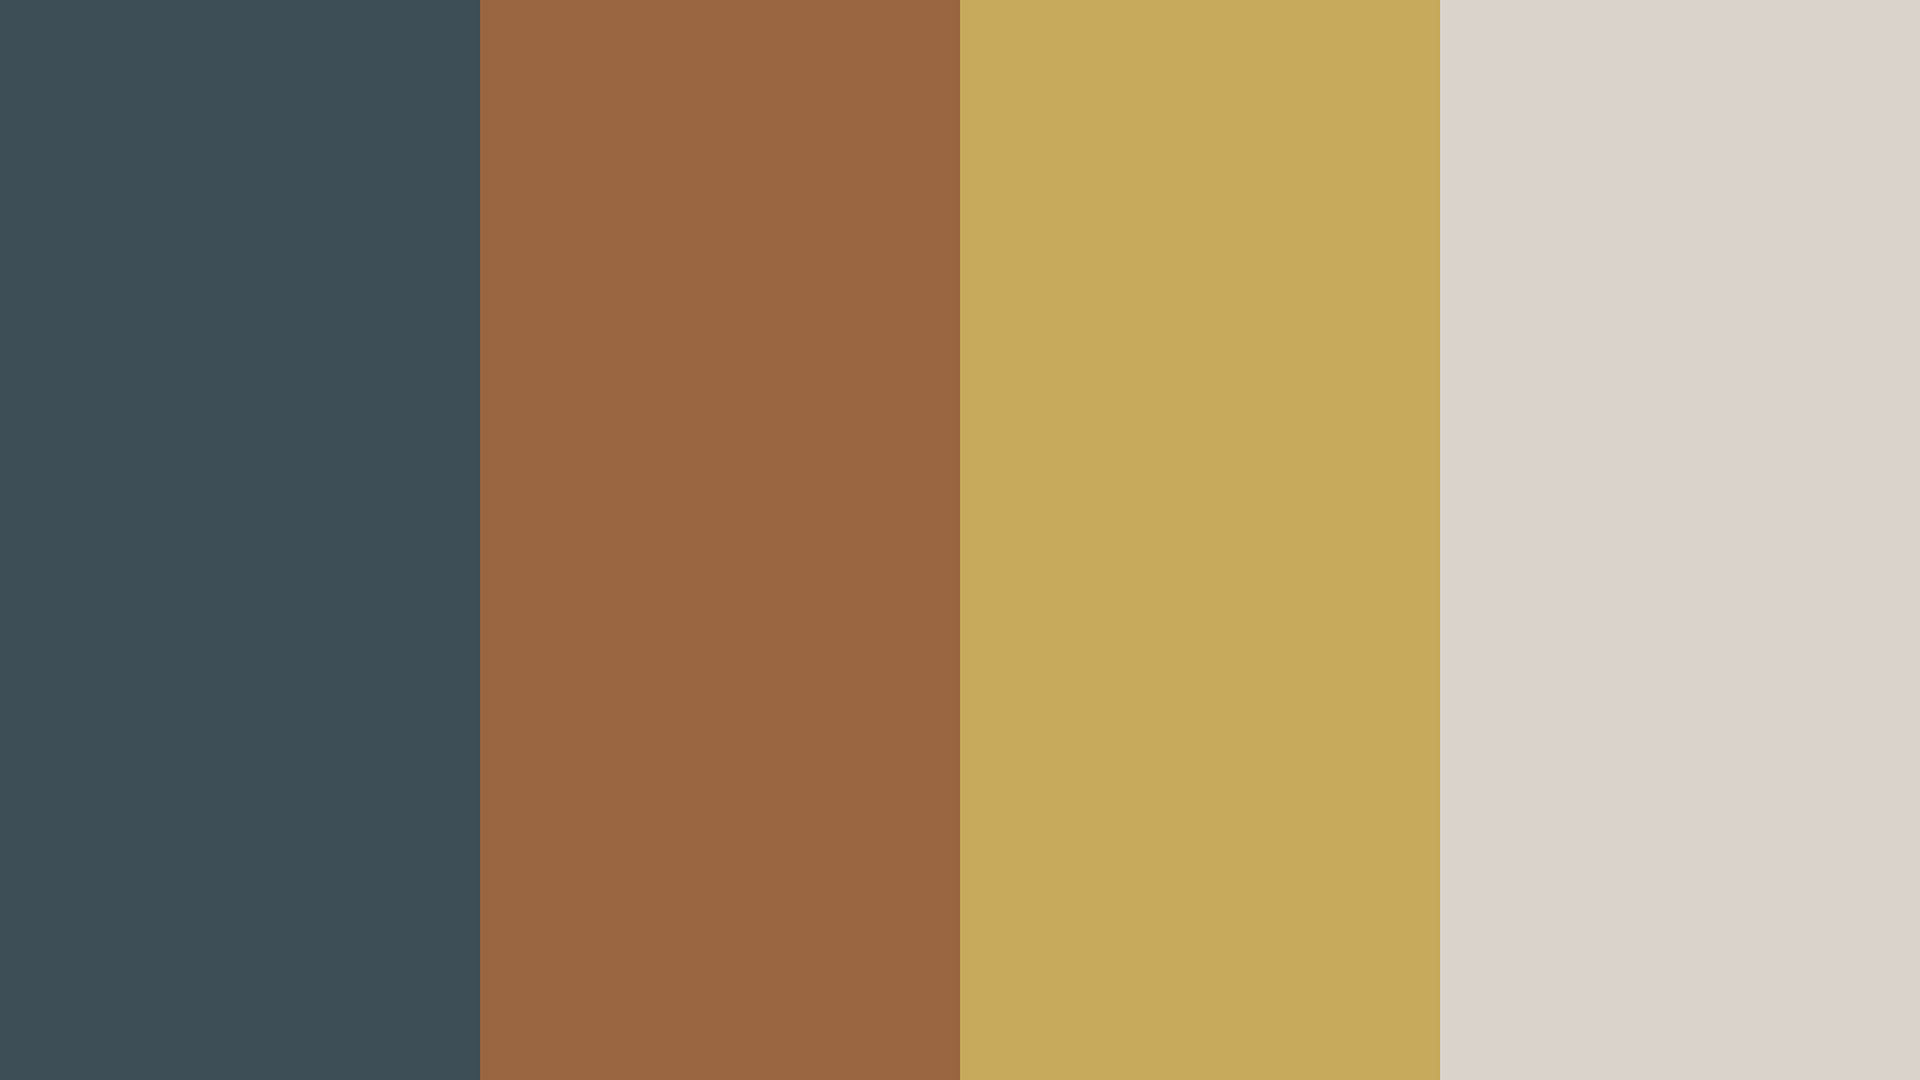 Rozzie boston-color palette with all colors